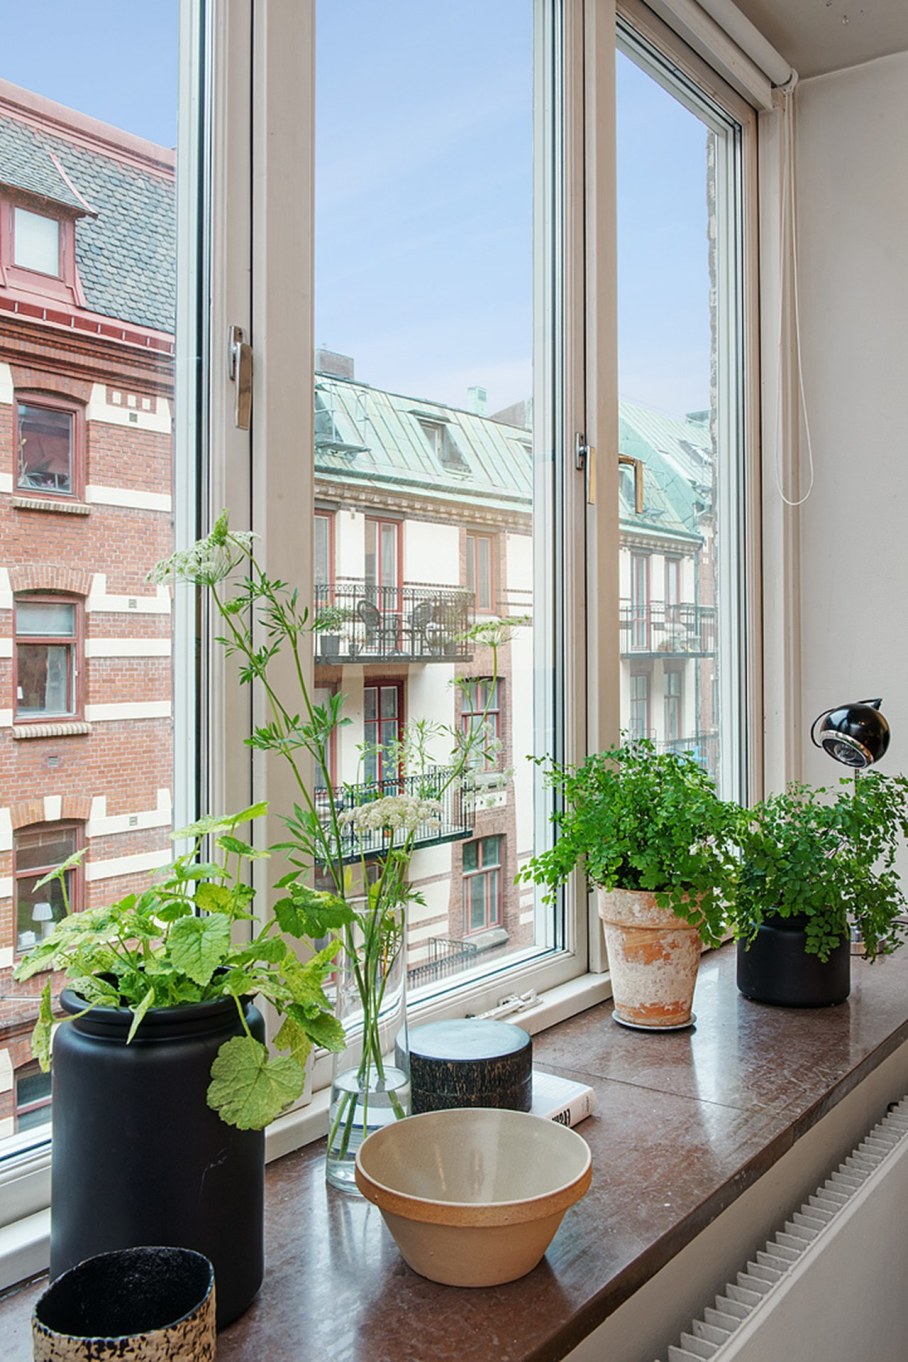 Scandinavian style interior design - large number of plants and flowers in pots